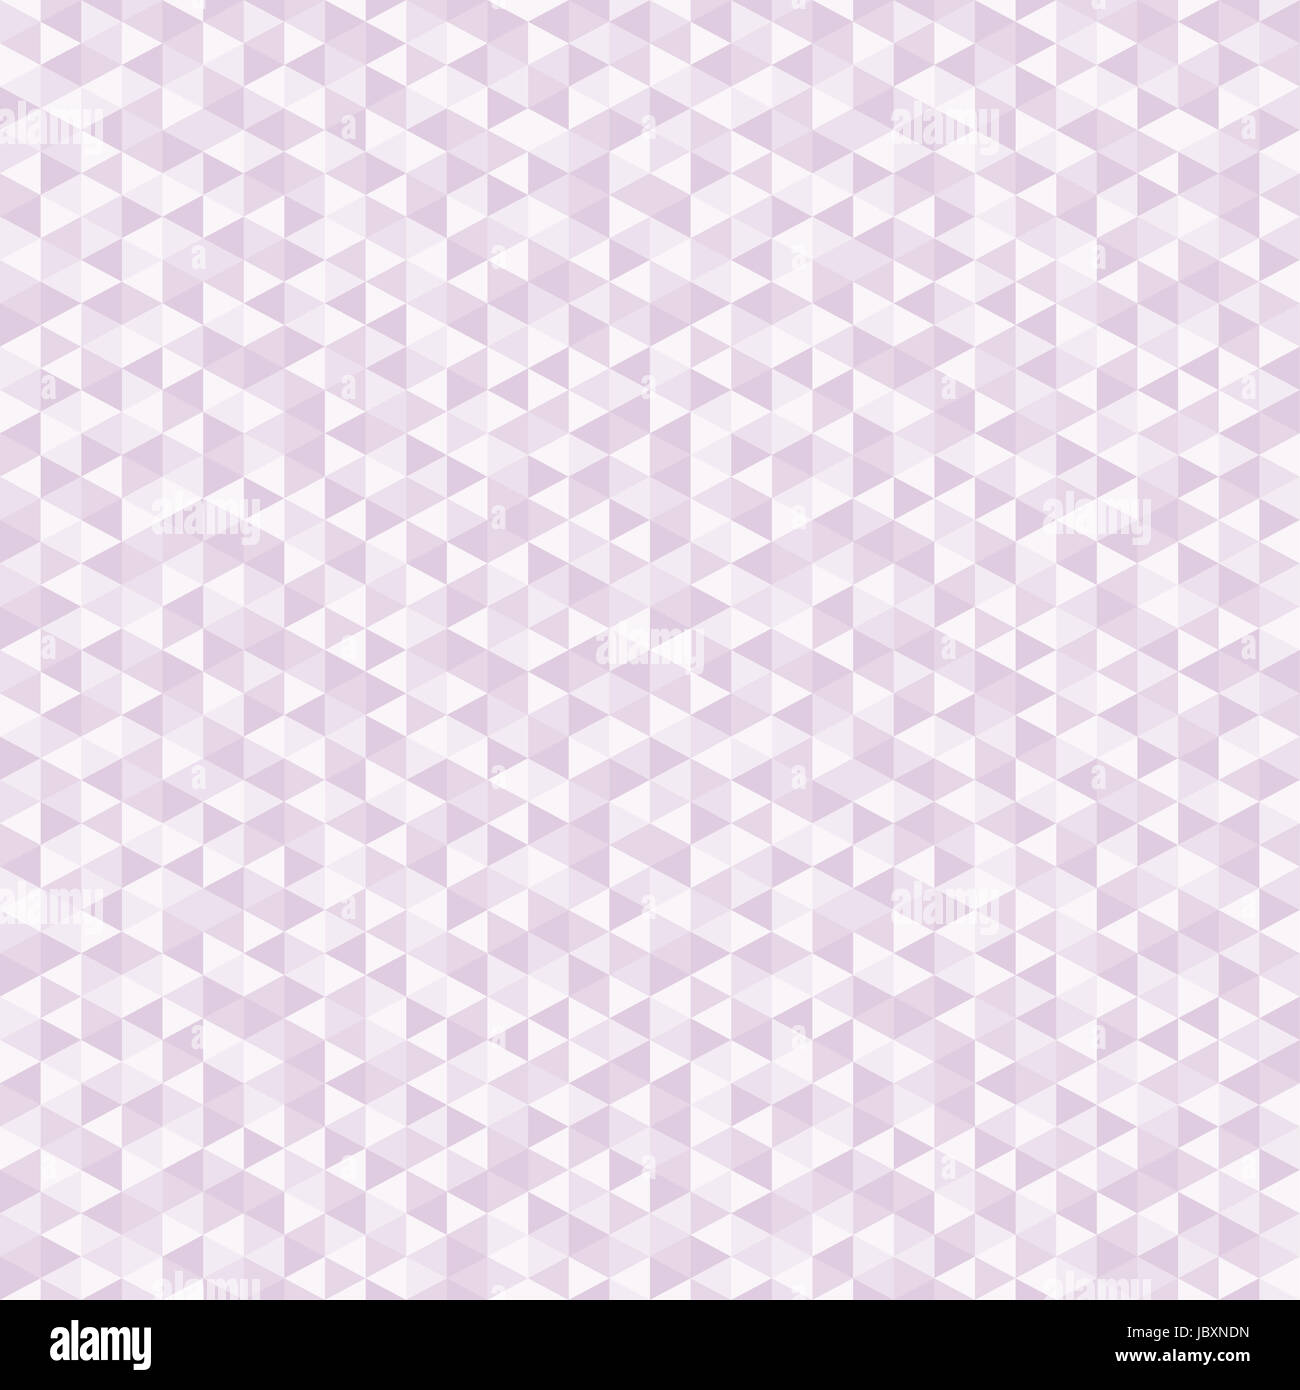 seamless rose colored abstract background vector illustration Stock Photo